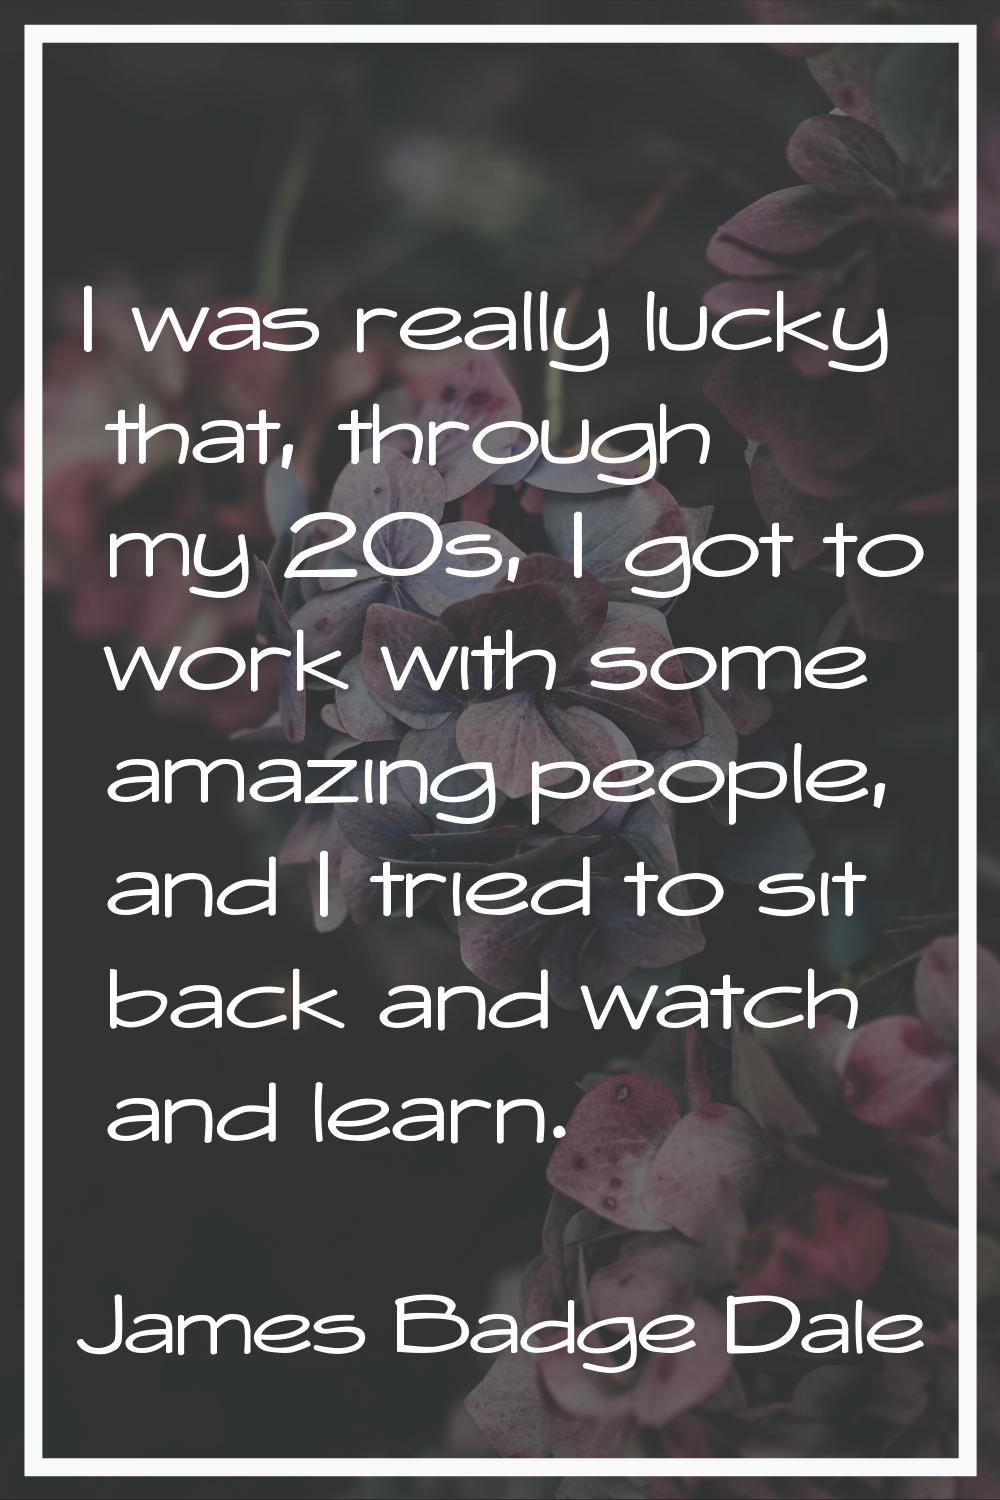 I was really lucky that, through my 20s, I got to work with some amazing people, and I tried to sit